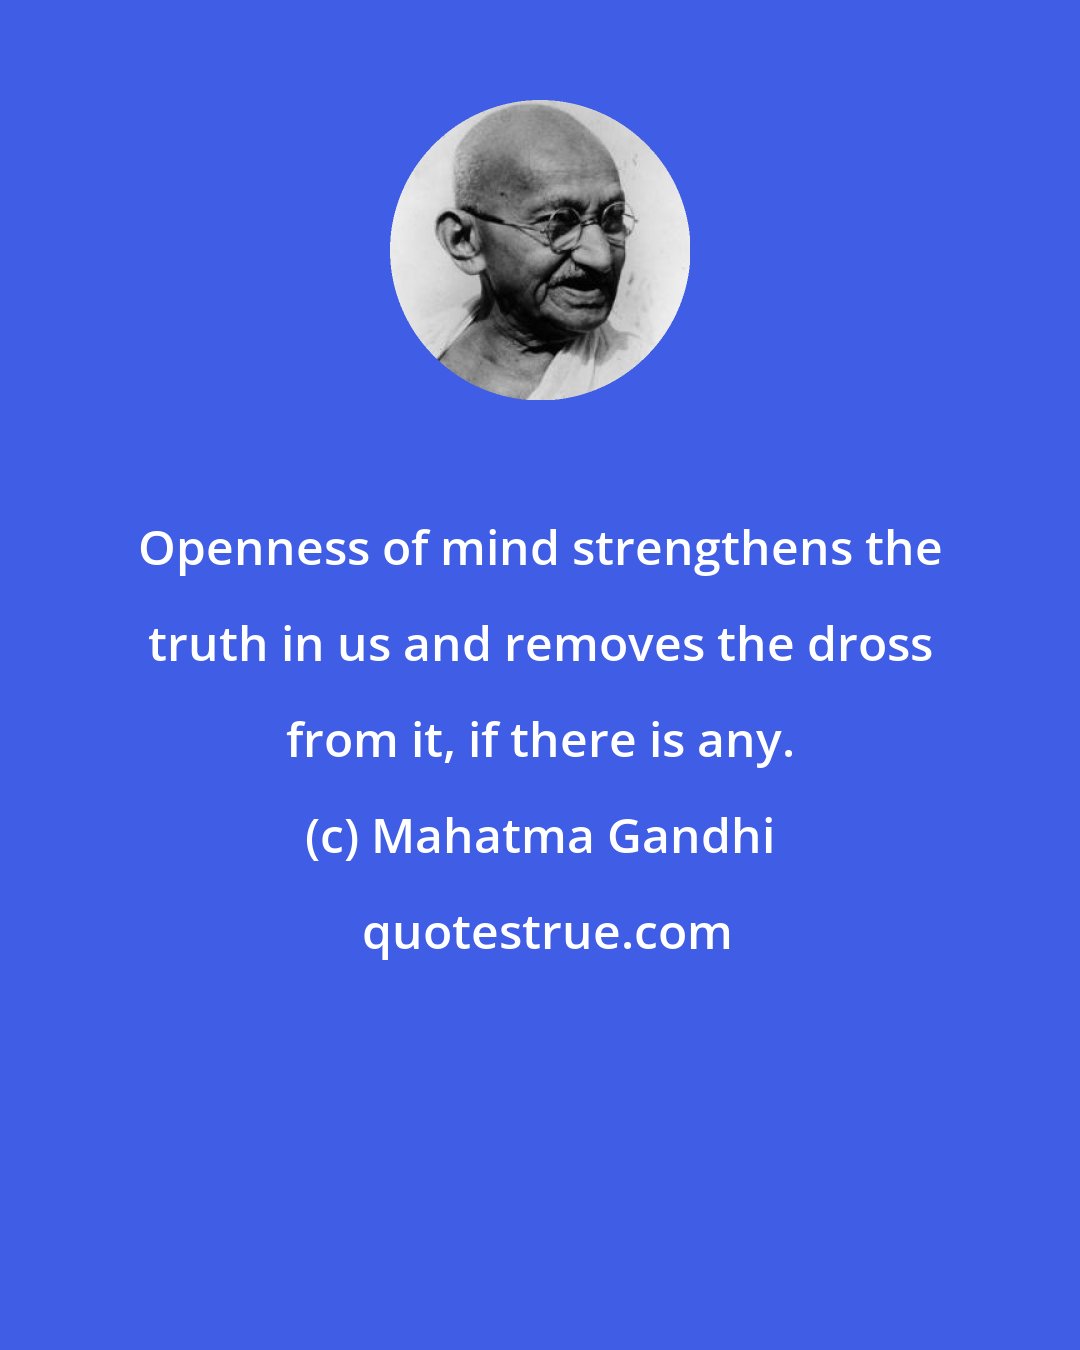 Mahatma Gandhi: Openness of mind strengthens the truth in us and removes the dross from it, if there is any.